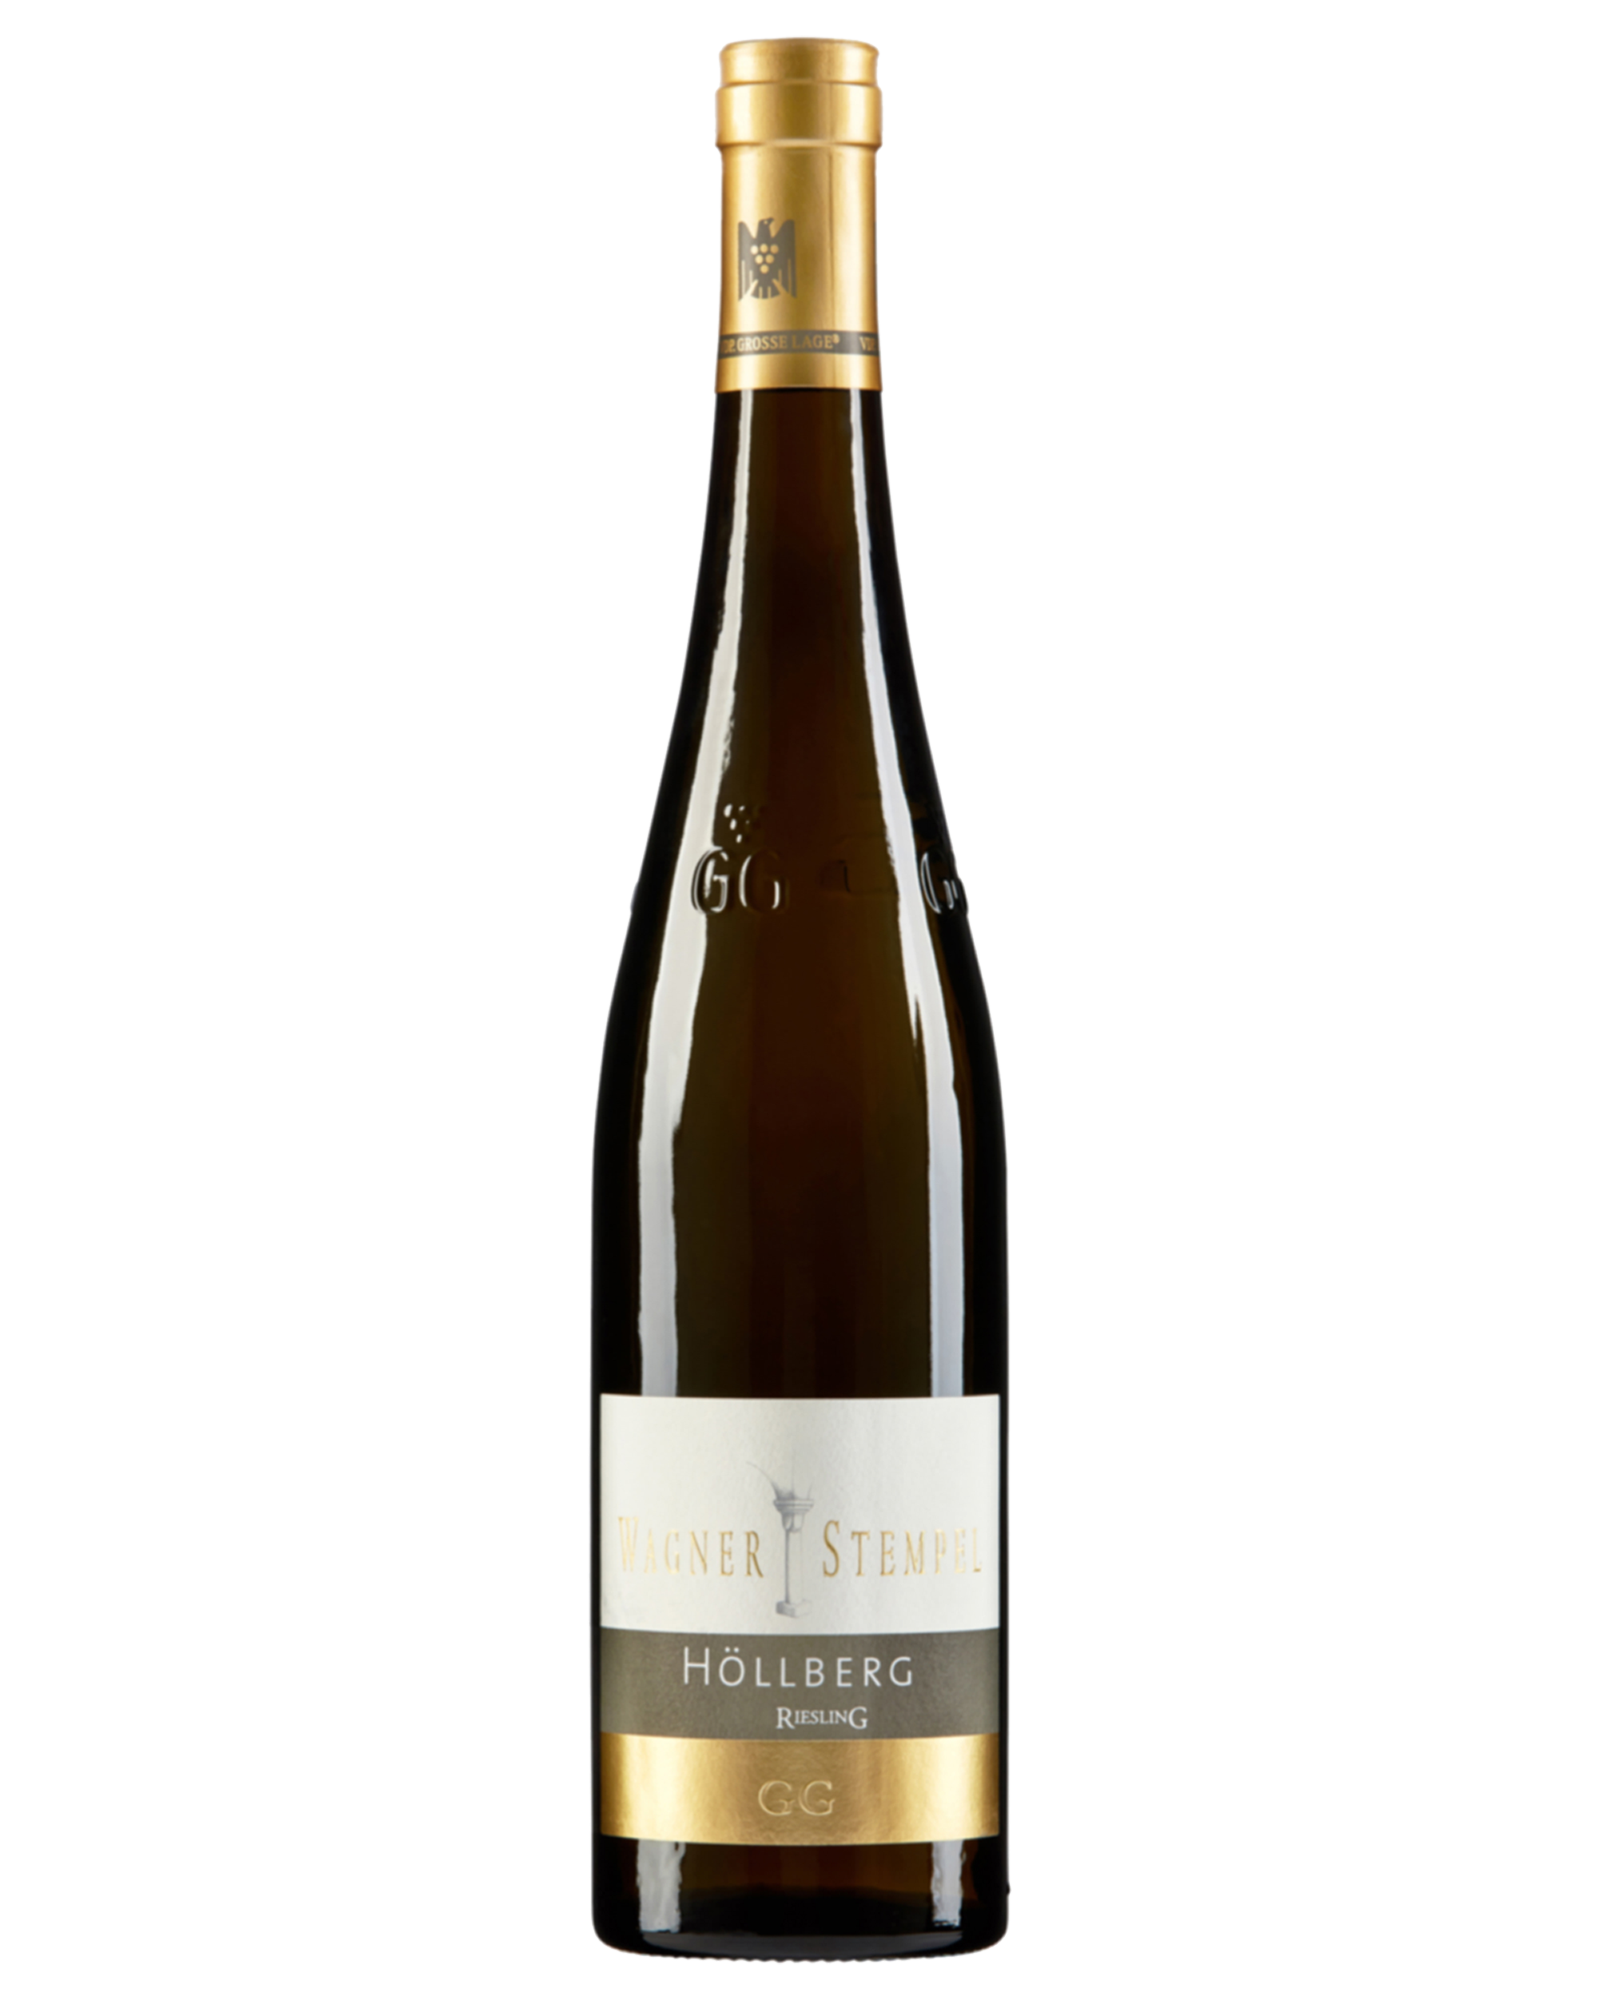 Wagner Stempel Holberg Riesling